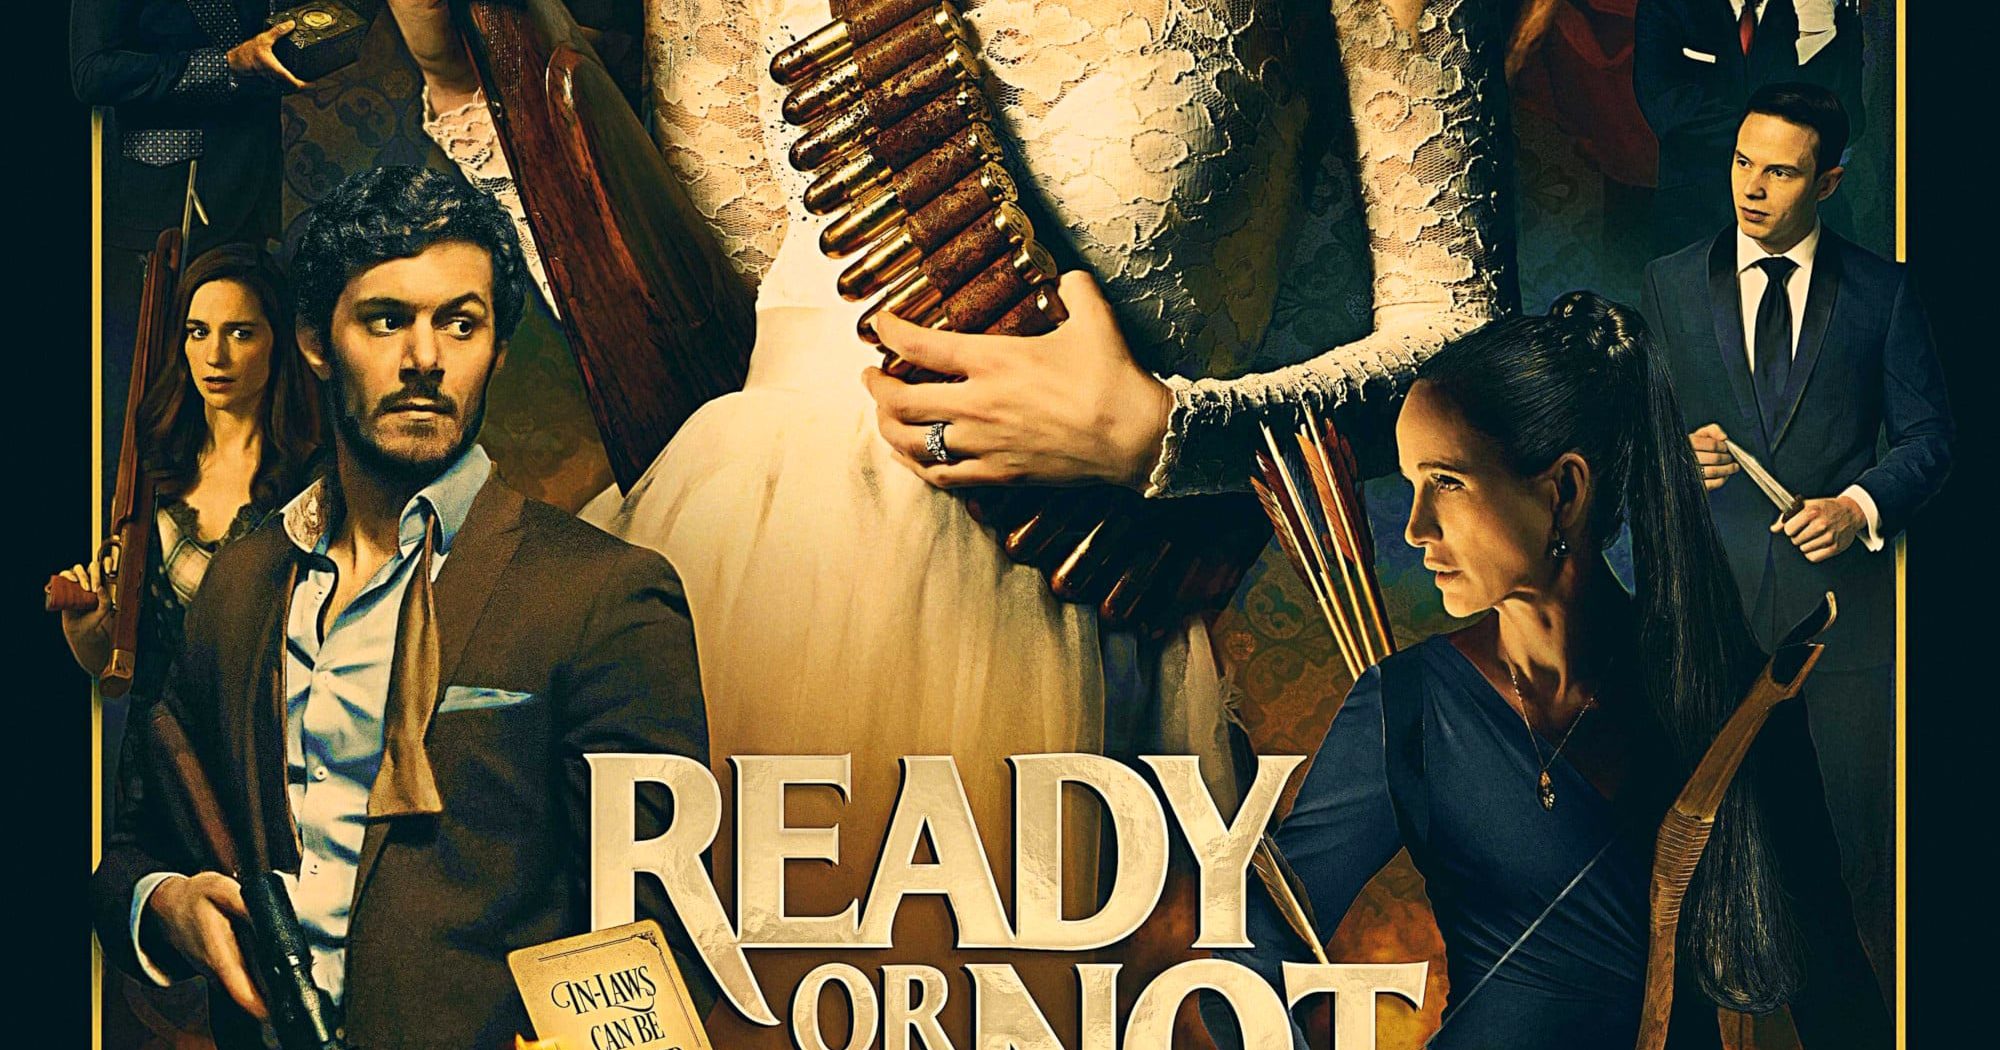 Poster for the movie "Ready or Not"